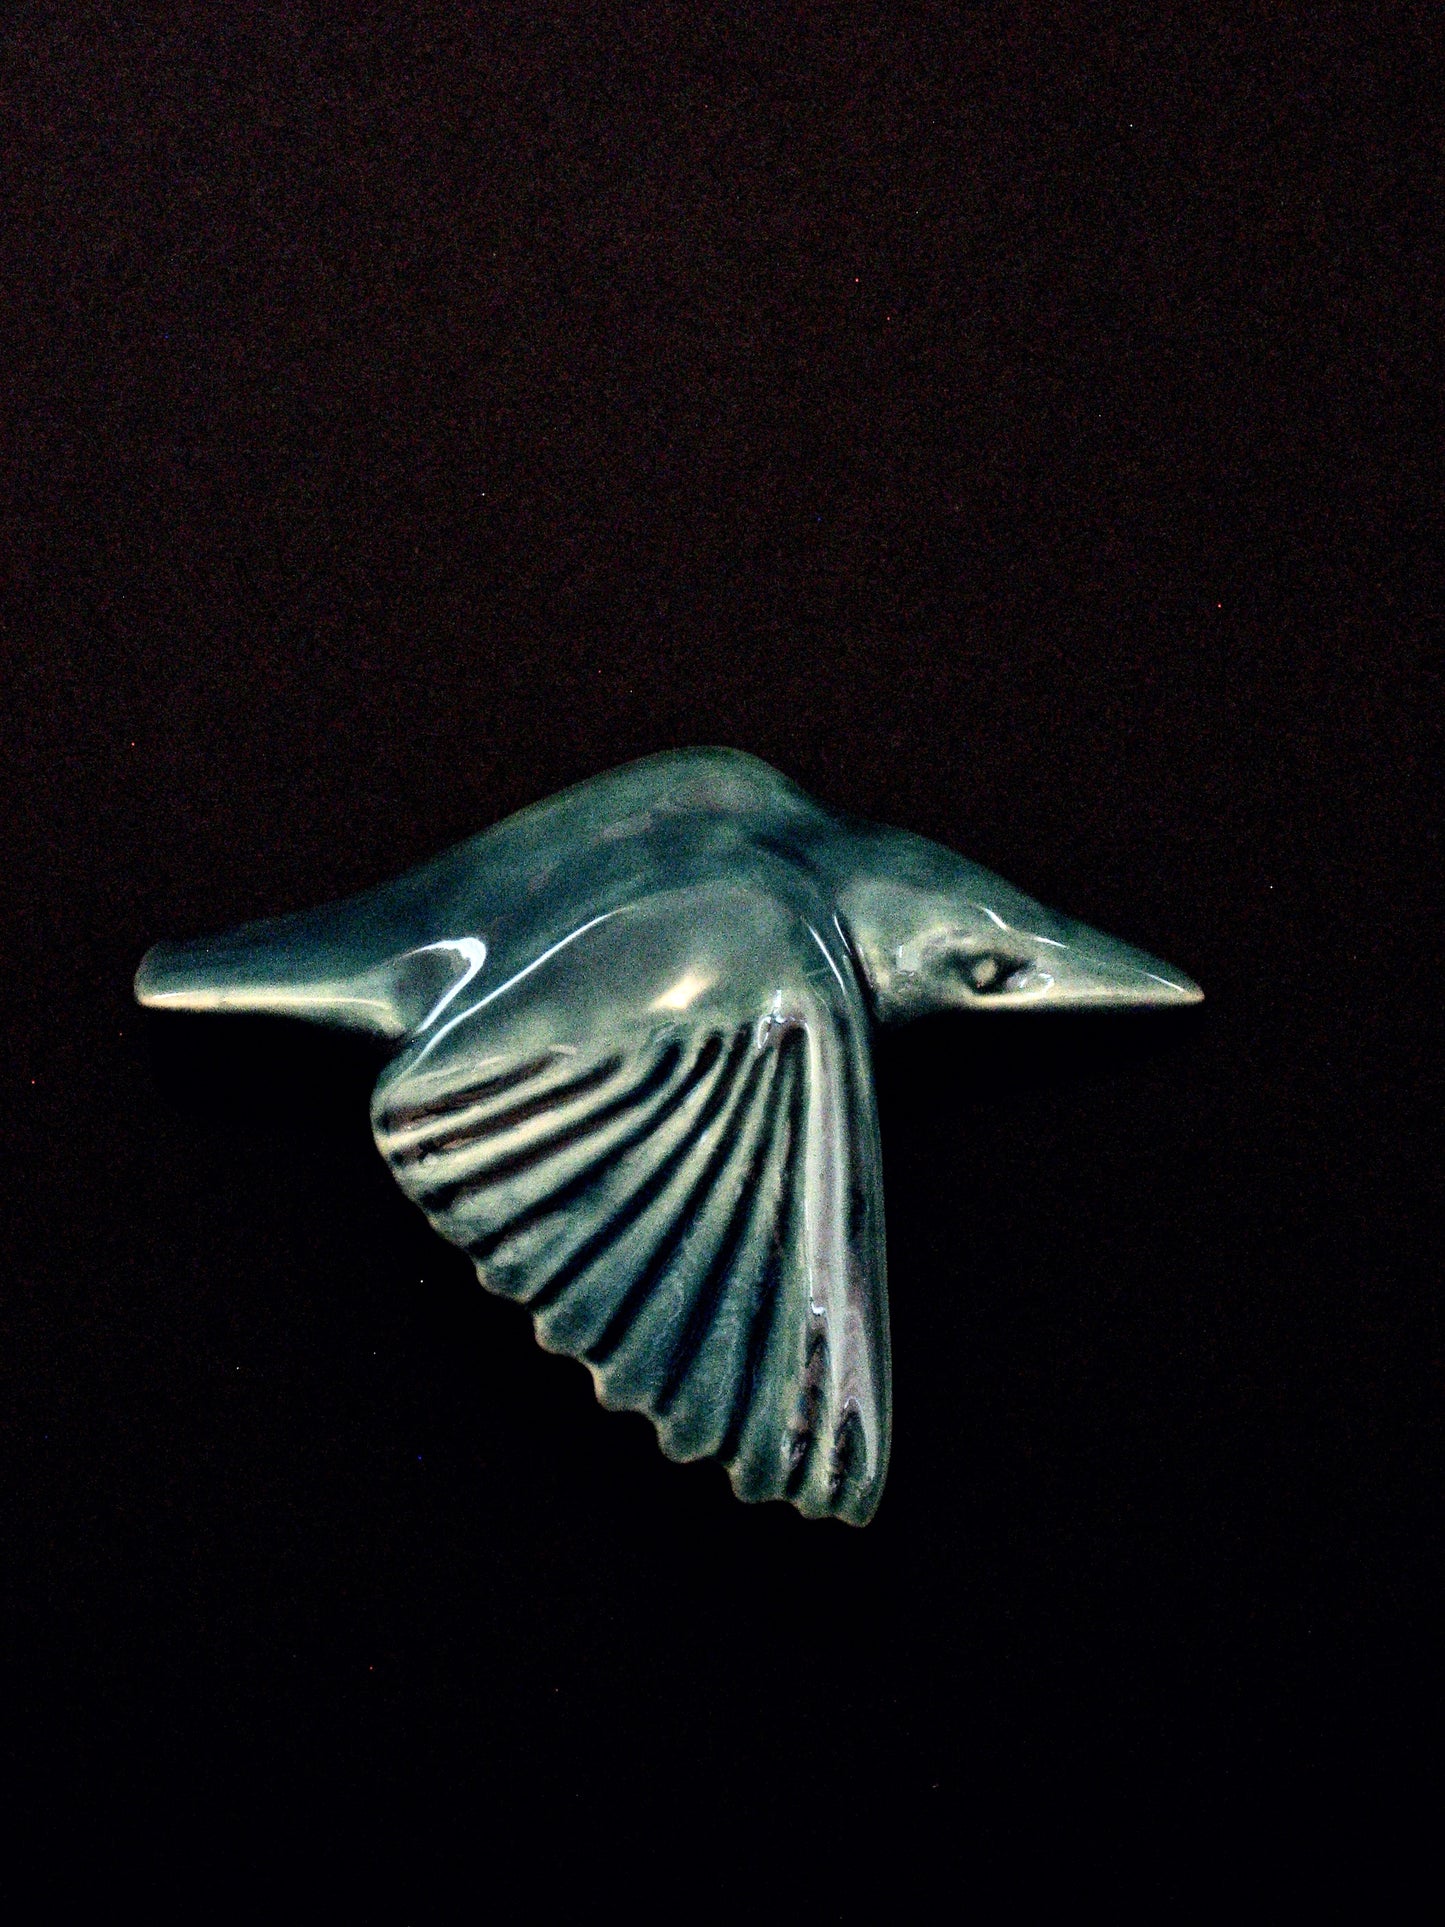 Ceramic Kotare (Kingfisher wings down) by Bob Steiner Silver Fern Gallery